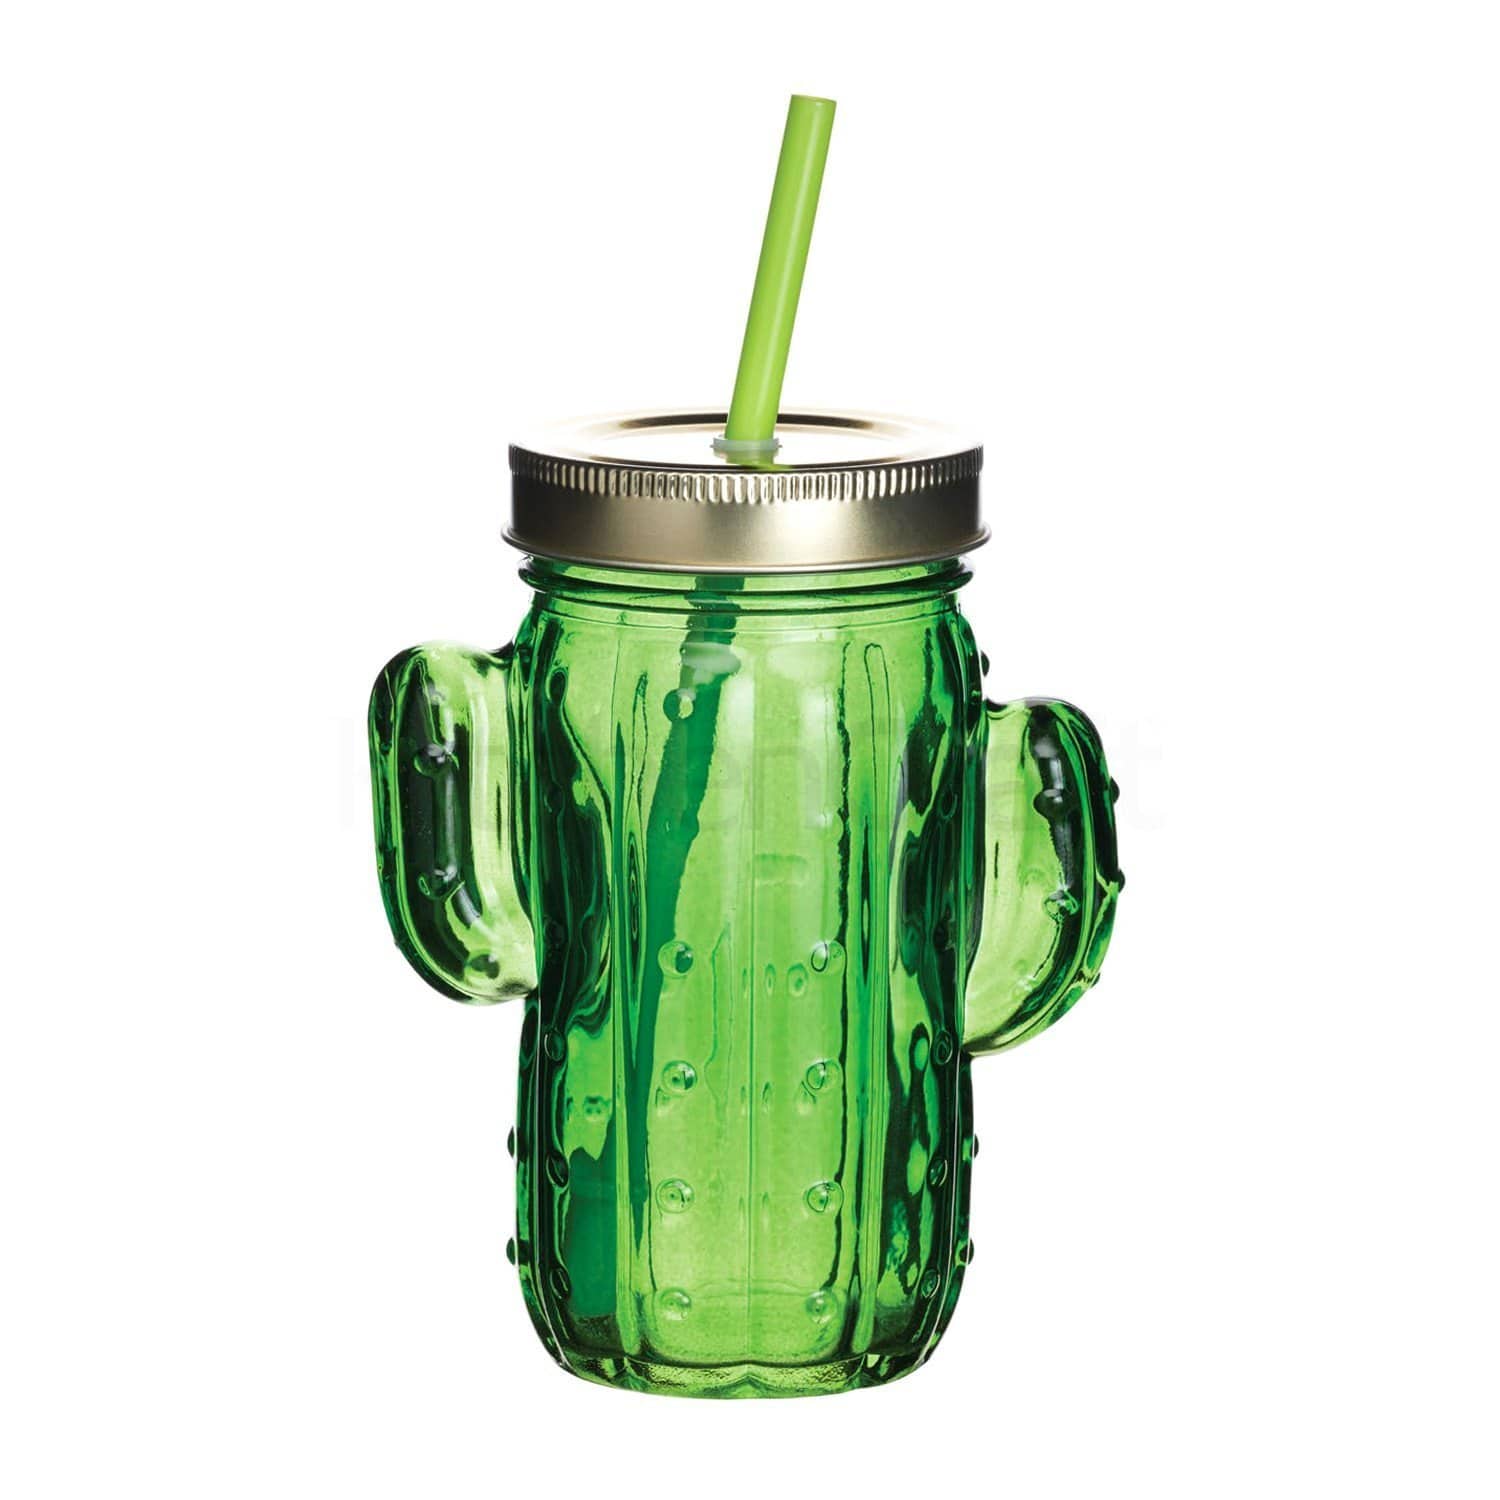 Kitchen Craft Barcraft Cactus Drinks Jar With Straw - Green and Silver - BCJARCACTUS - Jashanmal Home